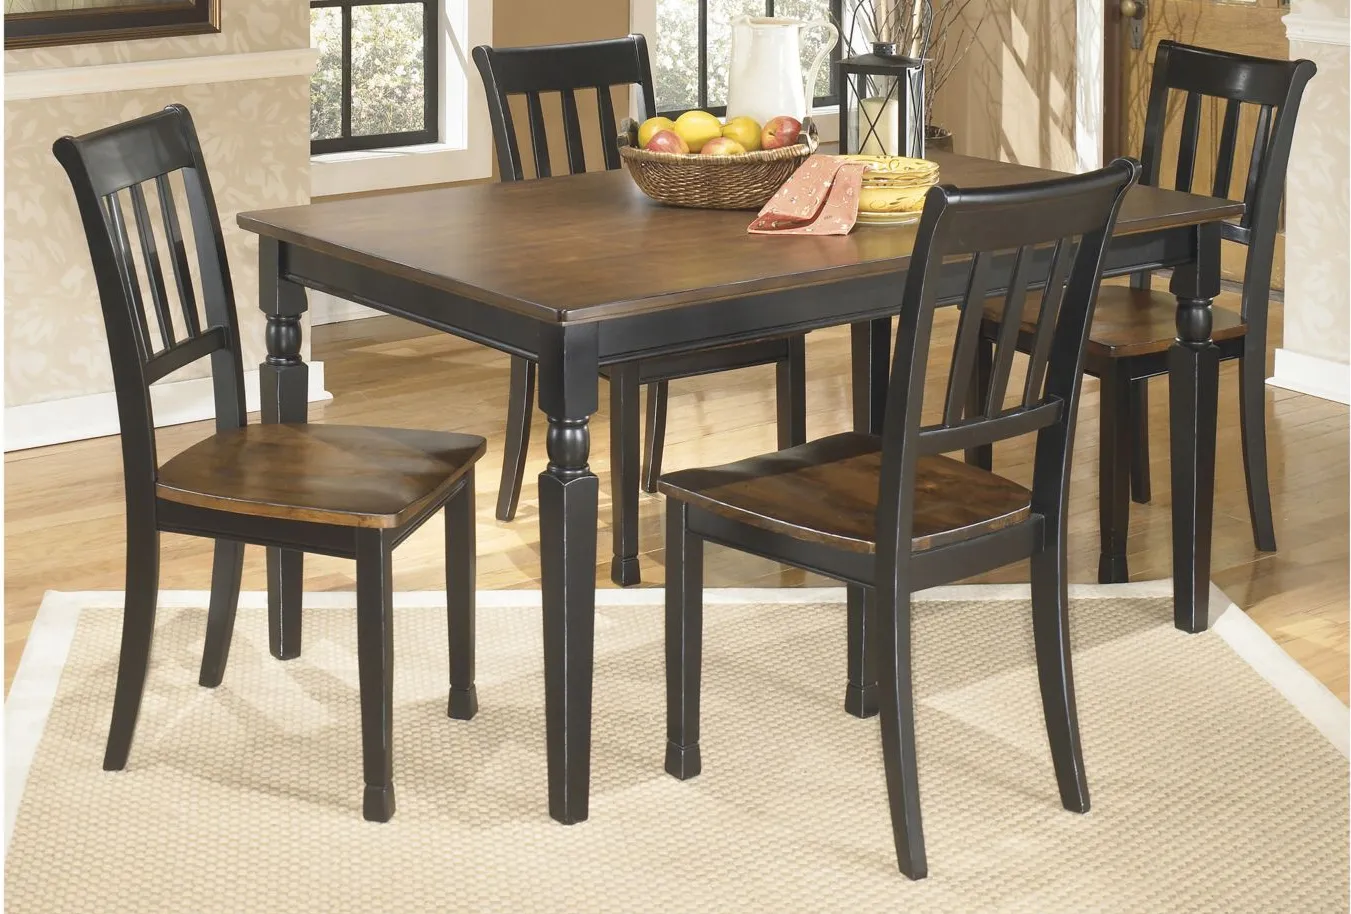 Owingsville 5-pc Dining Set in Black/Brown by Ashley Furniture